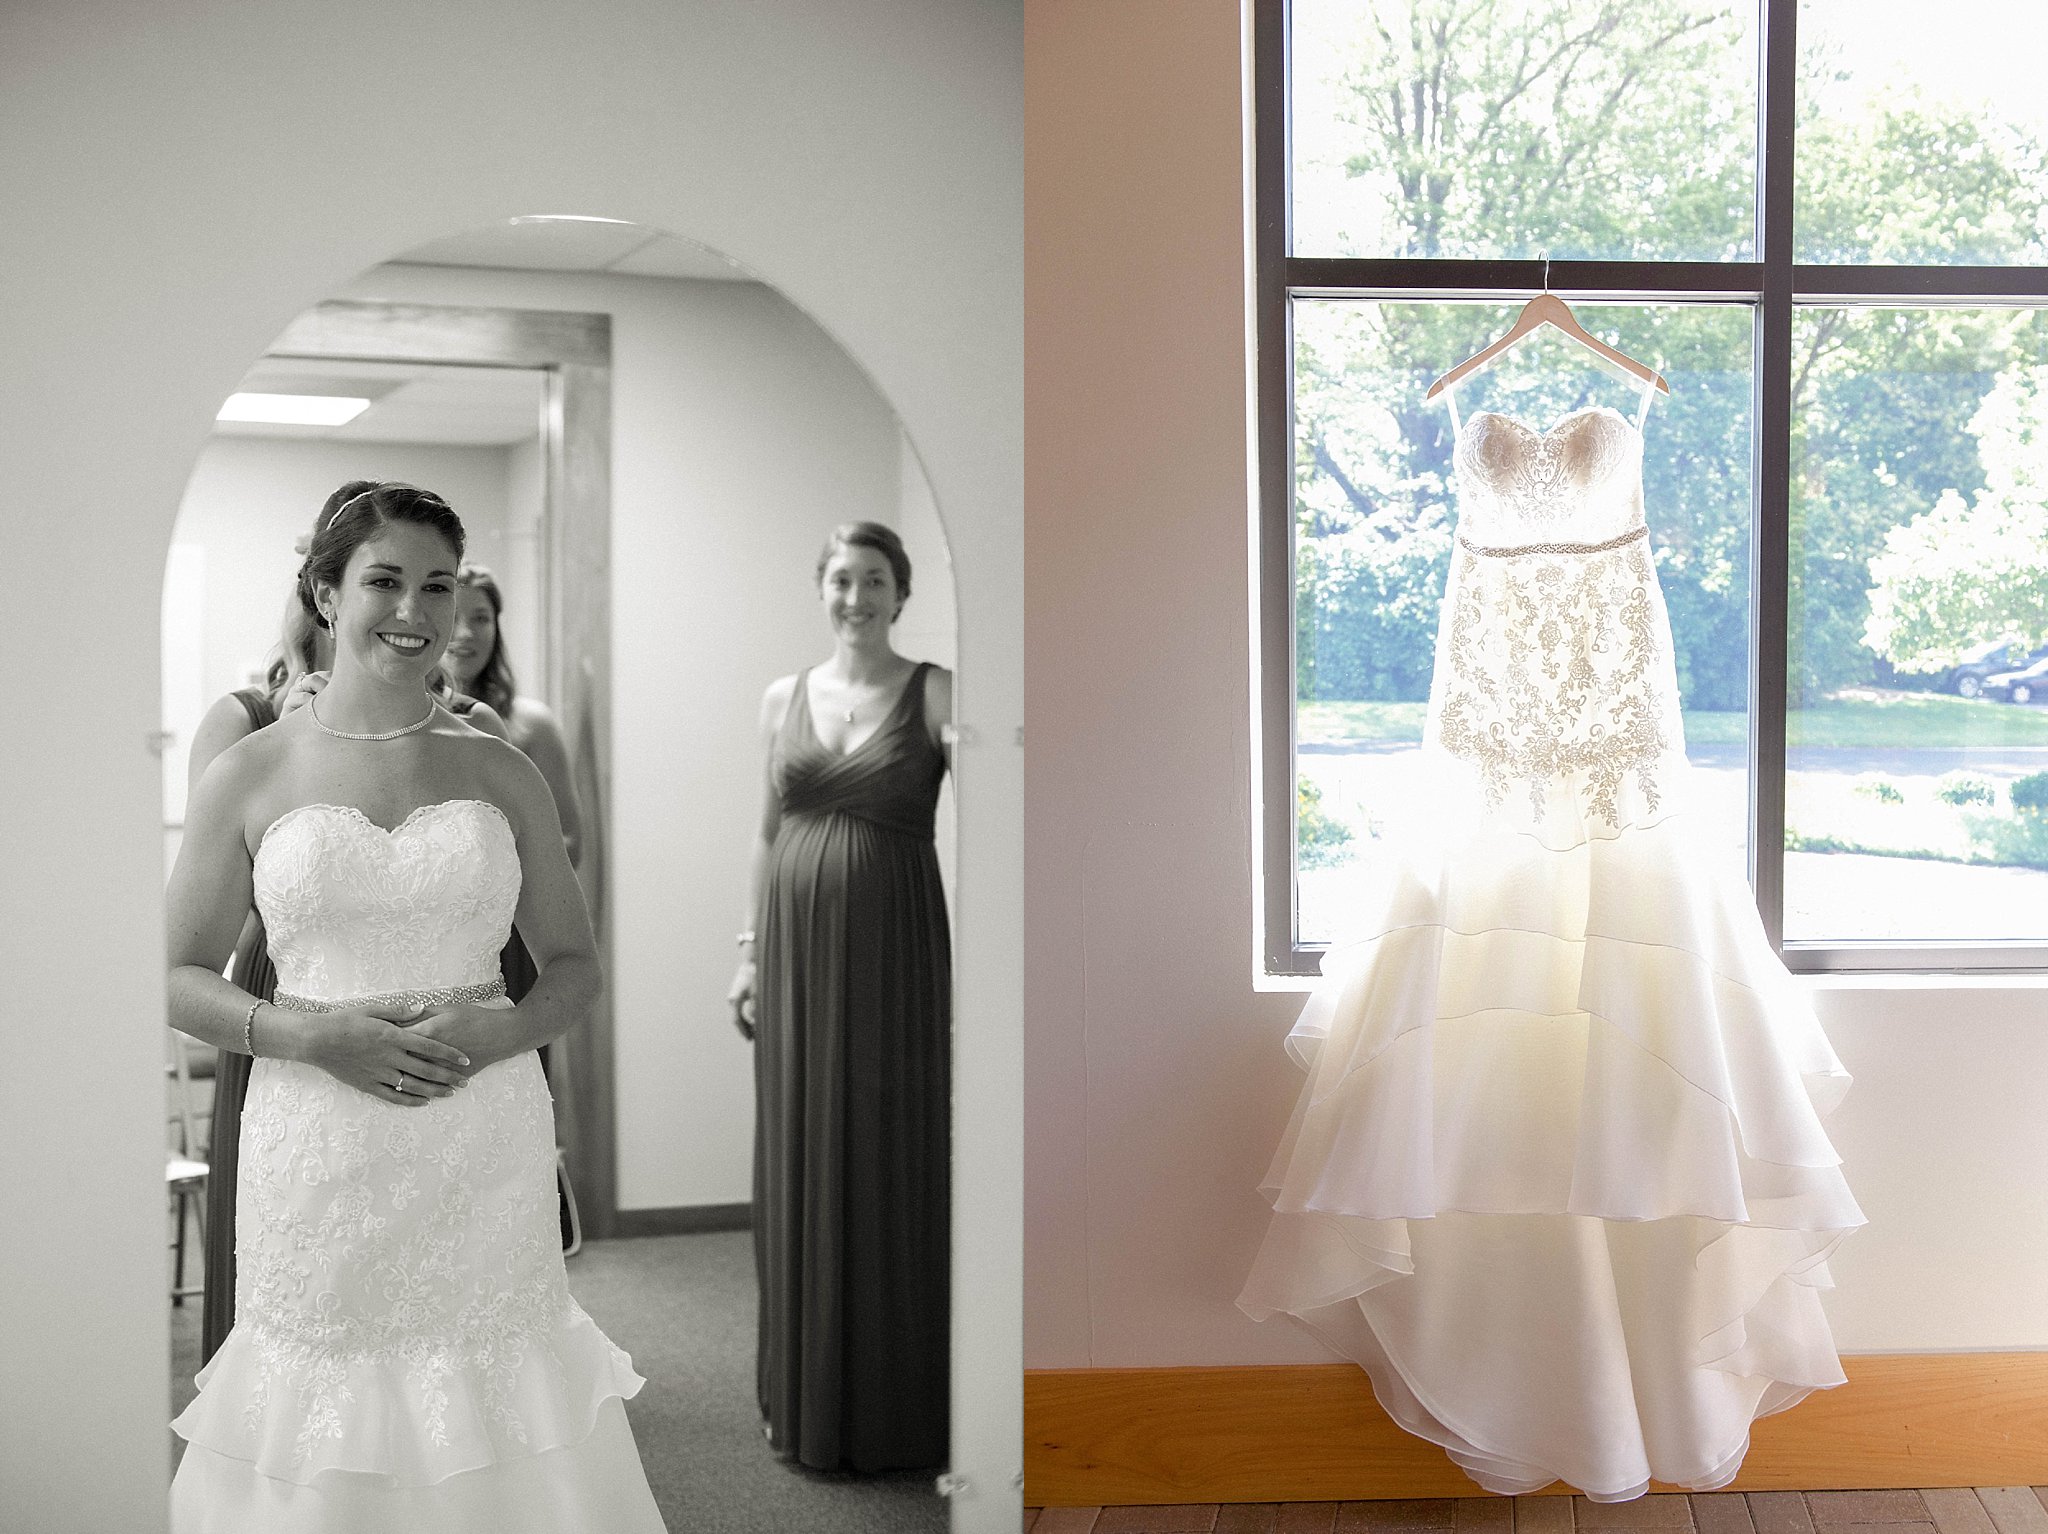 wedding at nationwide hotel and conference center, lewis center ohio, sweet williams photography, wedding photographer